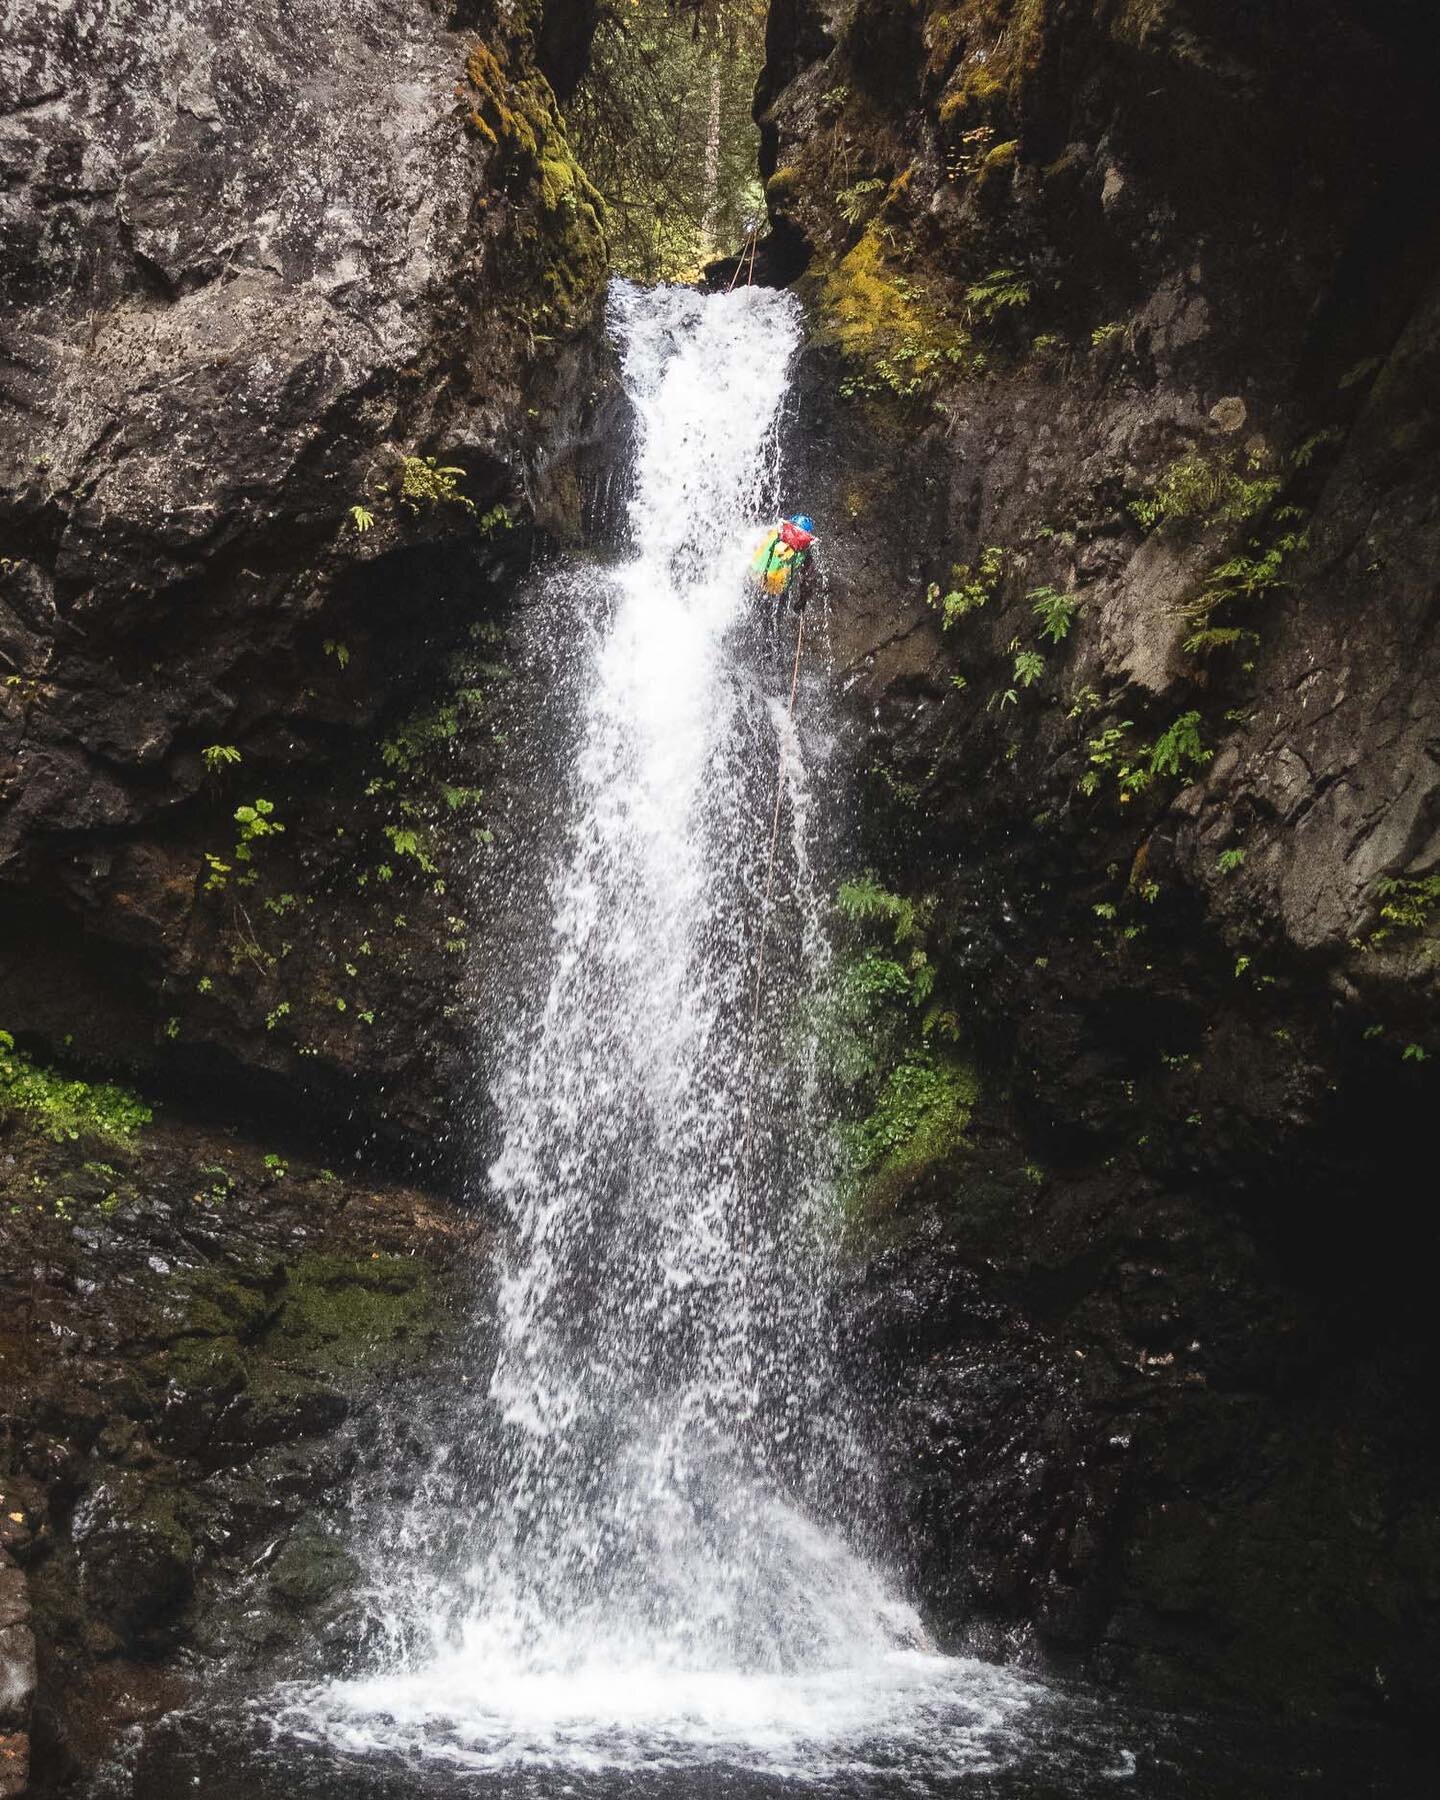 If it feels like you are getting waterboarded, step back.  You might just see the beauty in everything. #canyoneering #canyoning
.
.
.
.
.
#pnwdiscovered&nbsp;#pnwroamers&nbsp;#pnwonderland #pnwuncovered #theNWadventure #jj_oregon #northwestexplored 